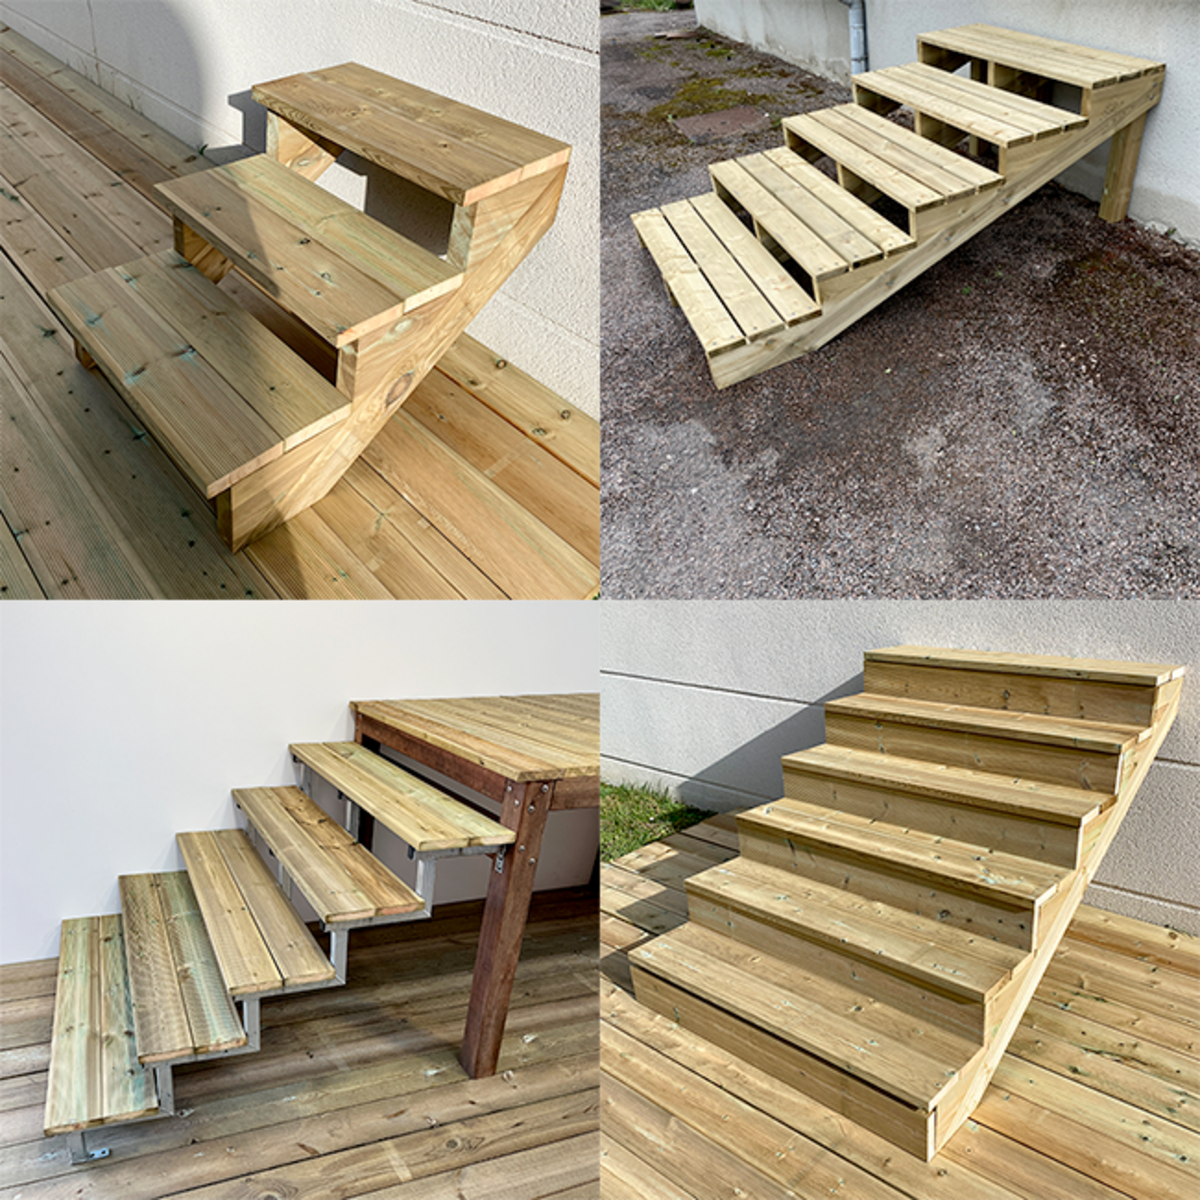 Extra large deck stairs out of wood for more comfort